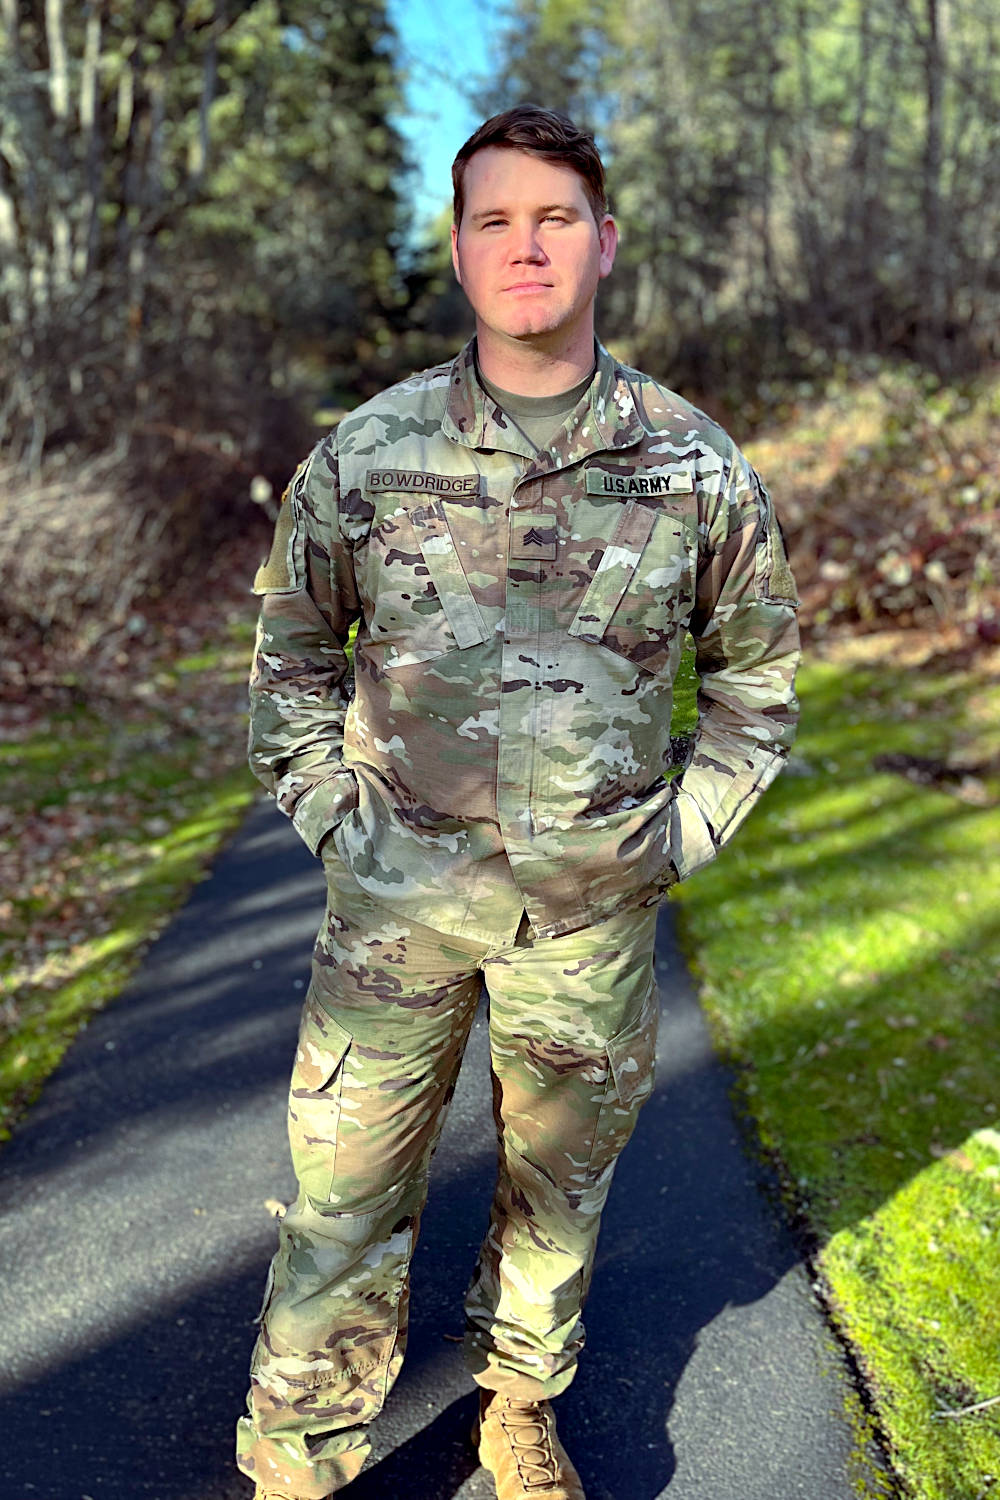 Man in battle dress uniform stands on a paved park trail.